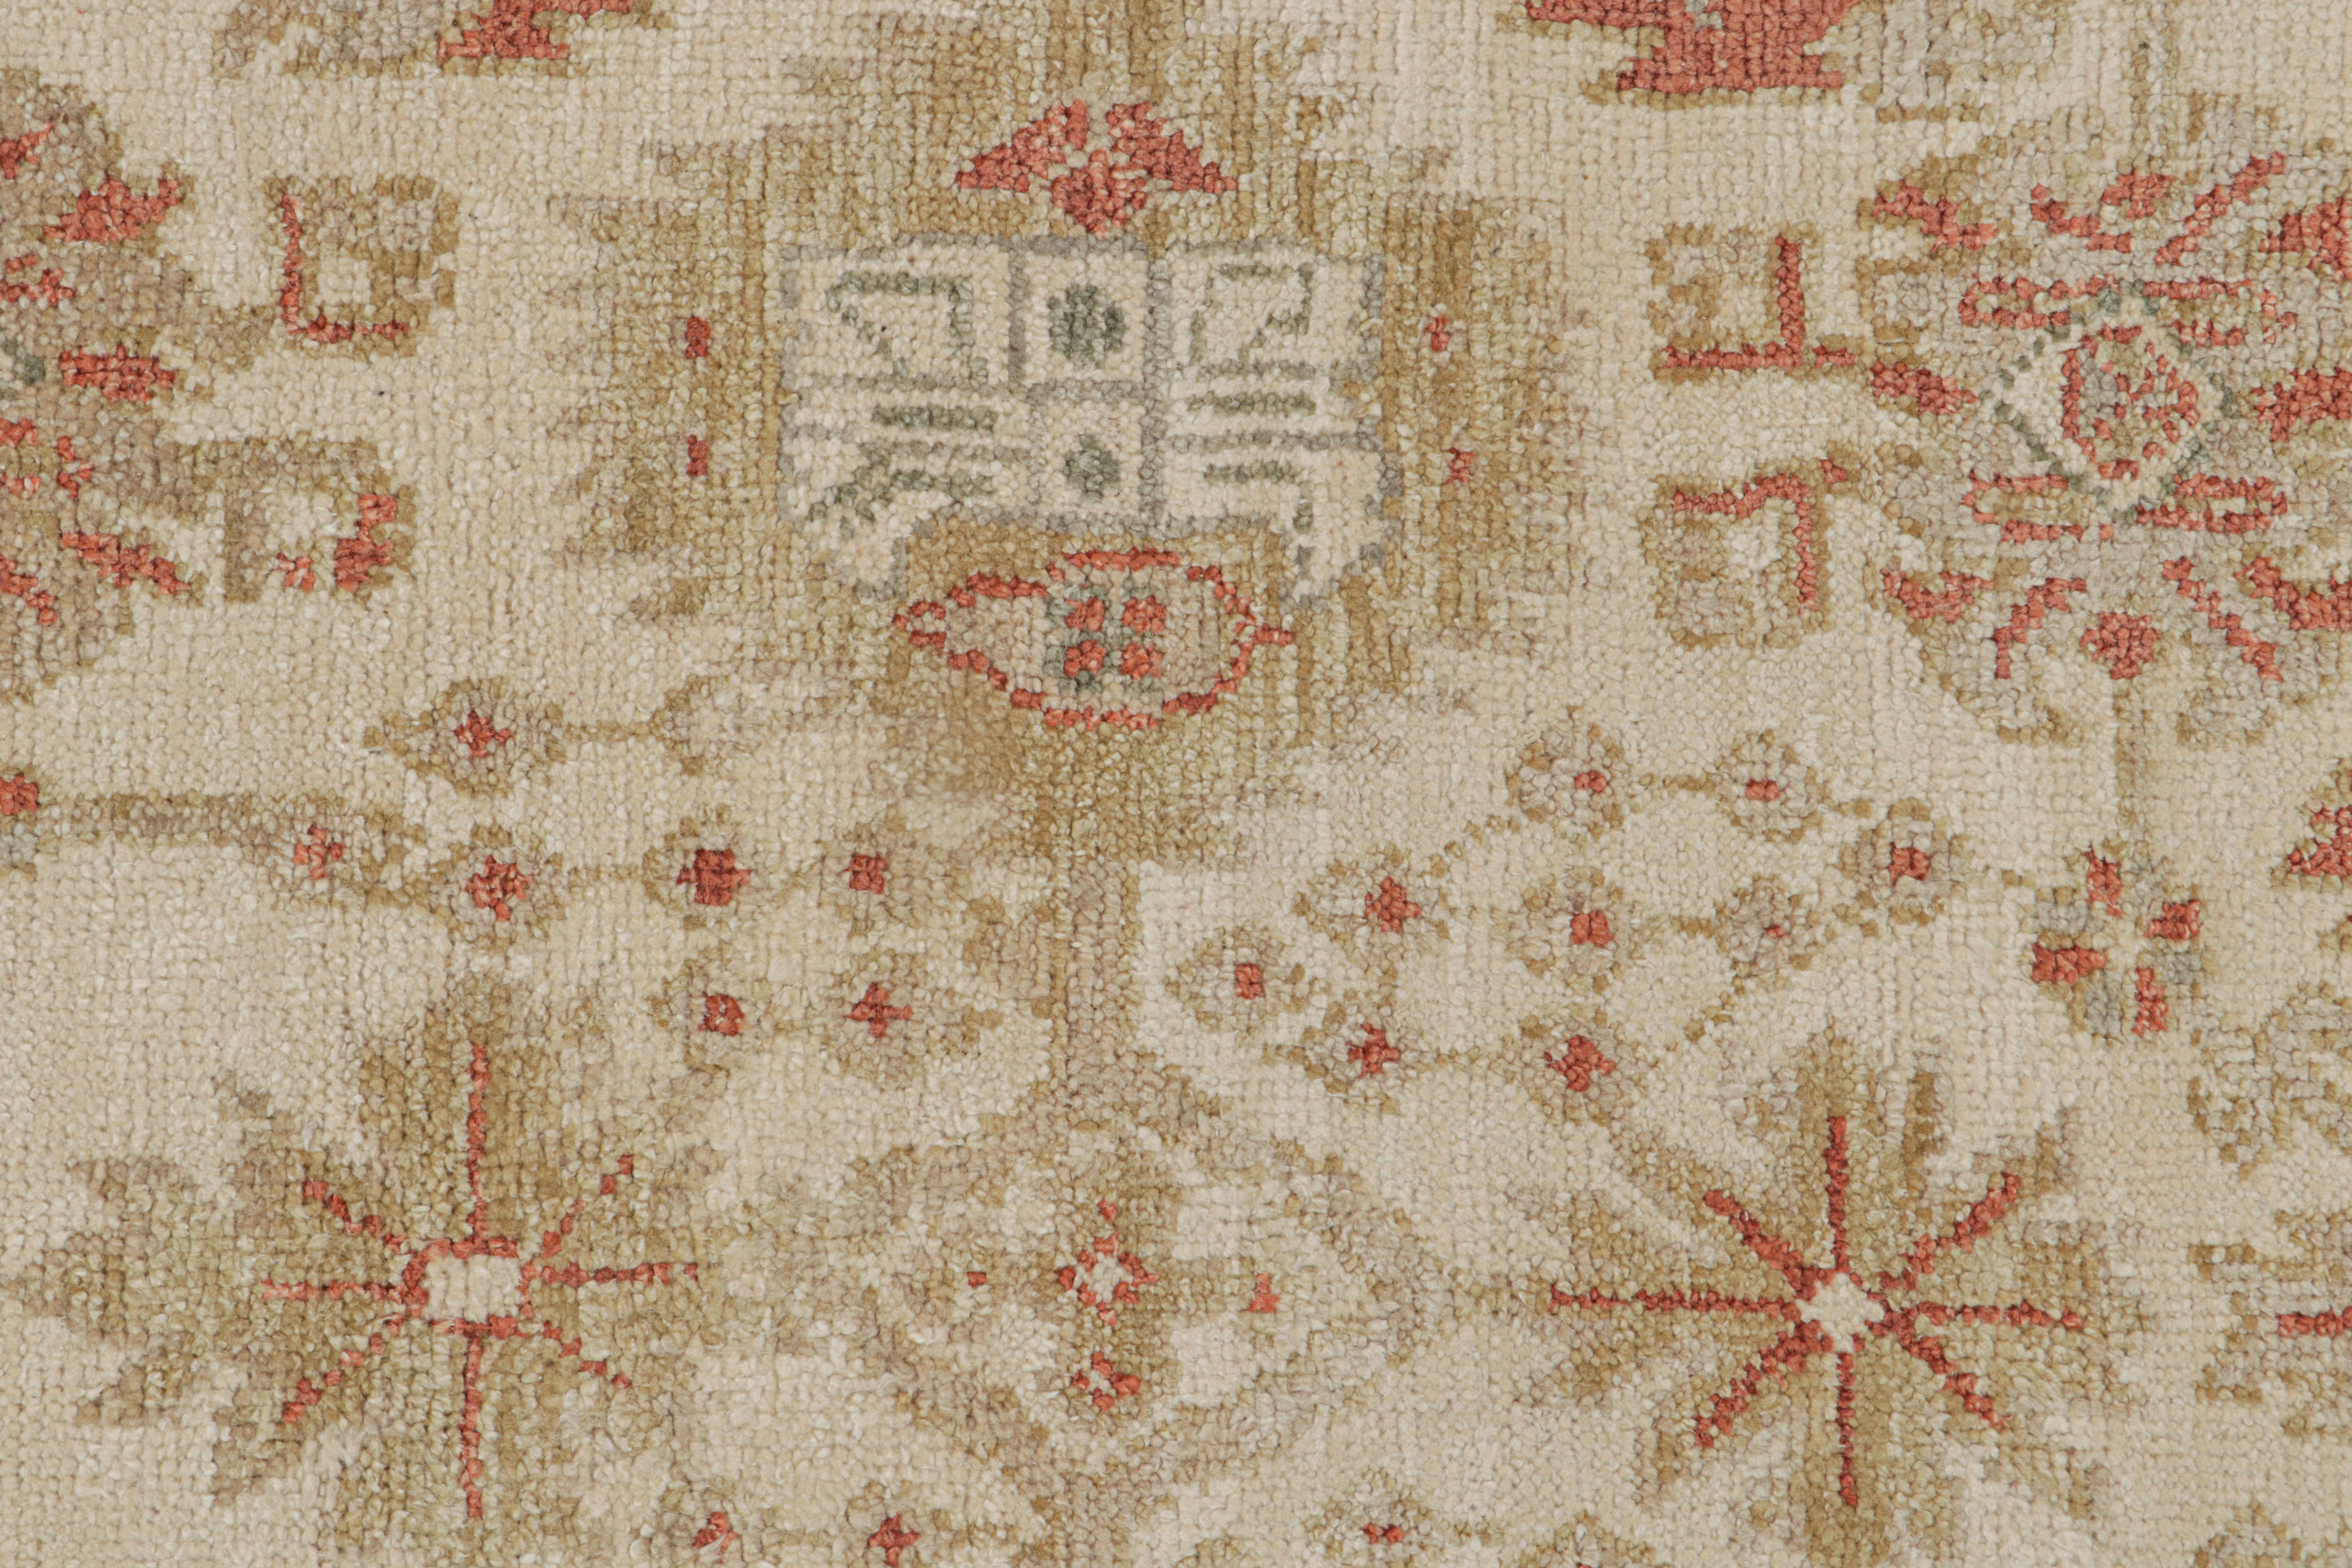 Contemporary Rug & Kilim’s Oushak Style Rug In Beige-Brown and Red Floral Pattern For Sale